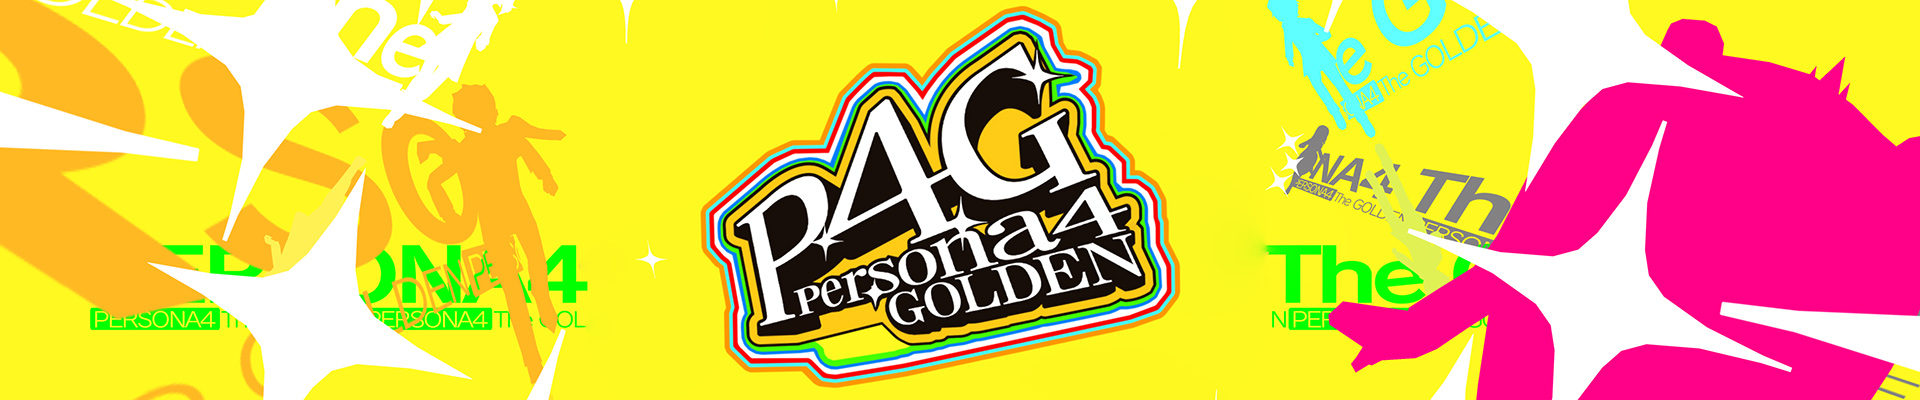 Happy about: Persona 4 Golden